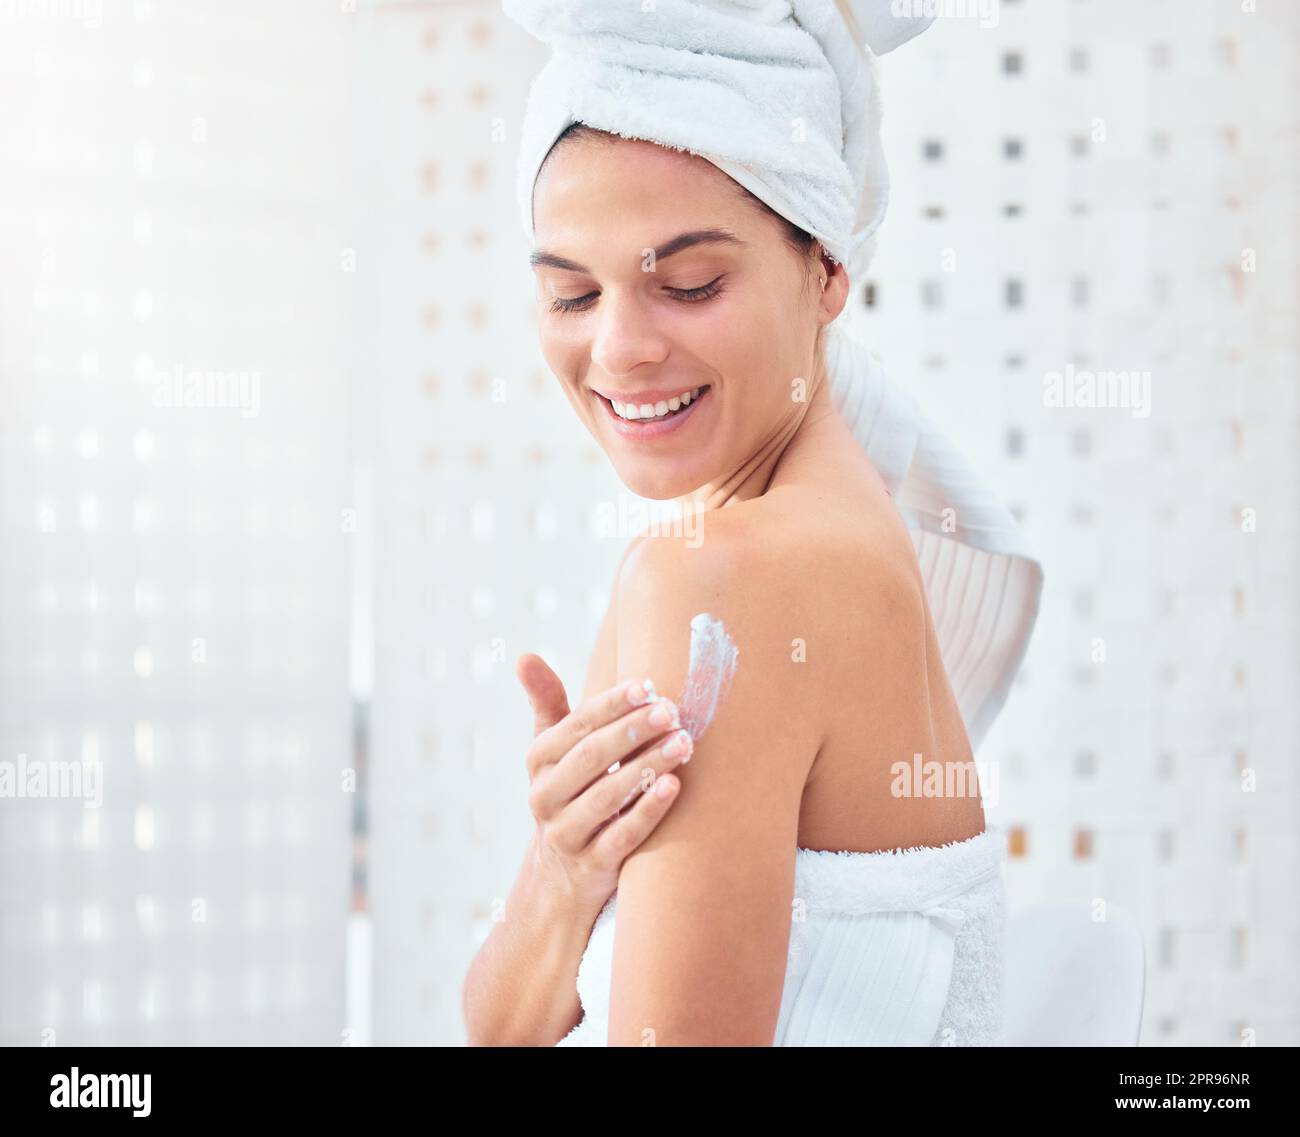 Soft skin brings me joy. a woman applying moisturiser to her arms and shoulders. Stock Photo